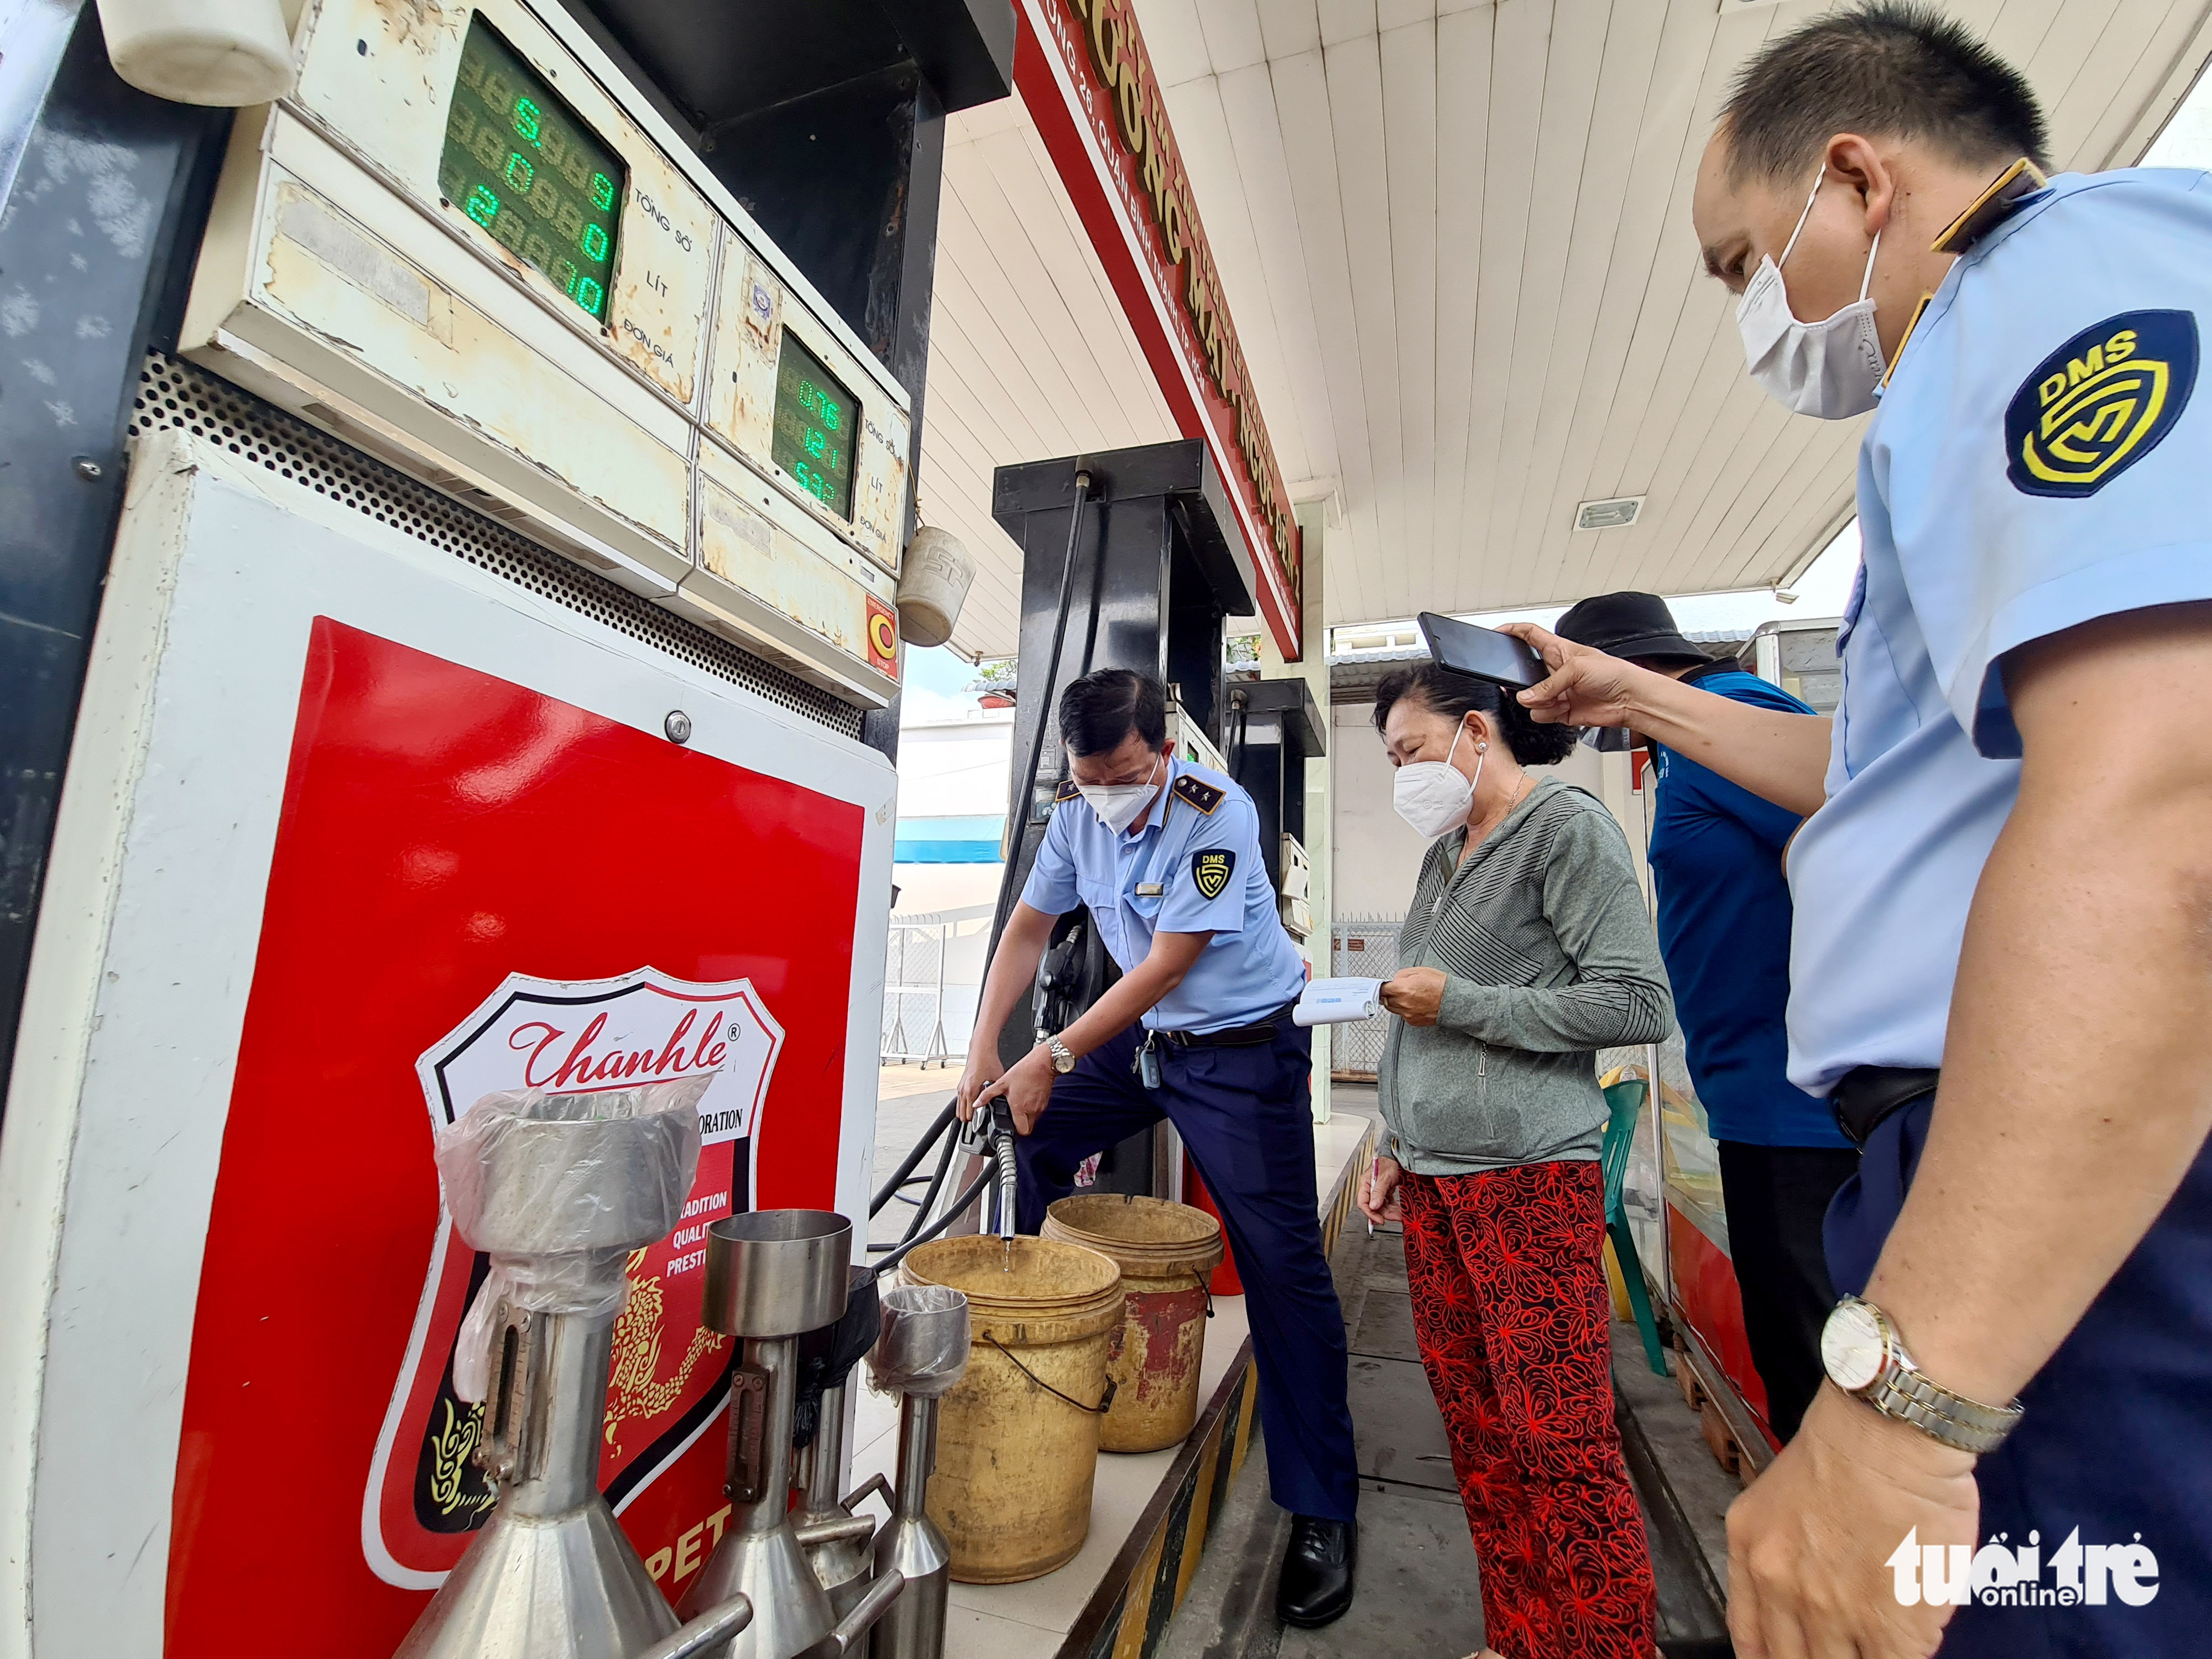 Market management officers inspect a filling station in Binh Thanh District, Ho Chi Minh City, February 20, 2022. Photo: Ngoc Hien / Tuoi Tre